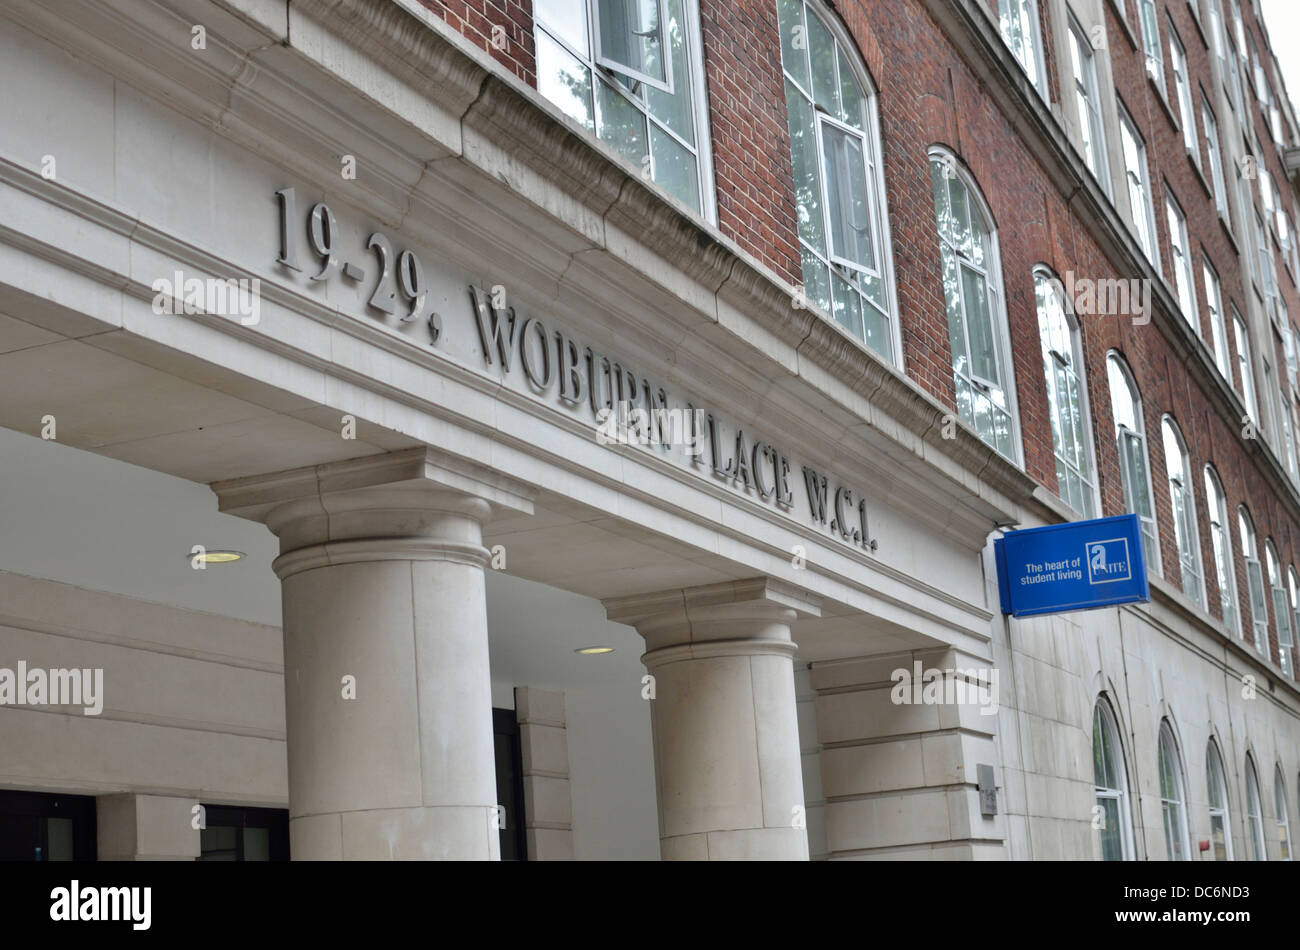 UNITE student accommodation in Woburn Place, WC1, Londres, Royaume-Uni. Banque D'Images